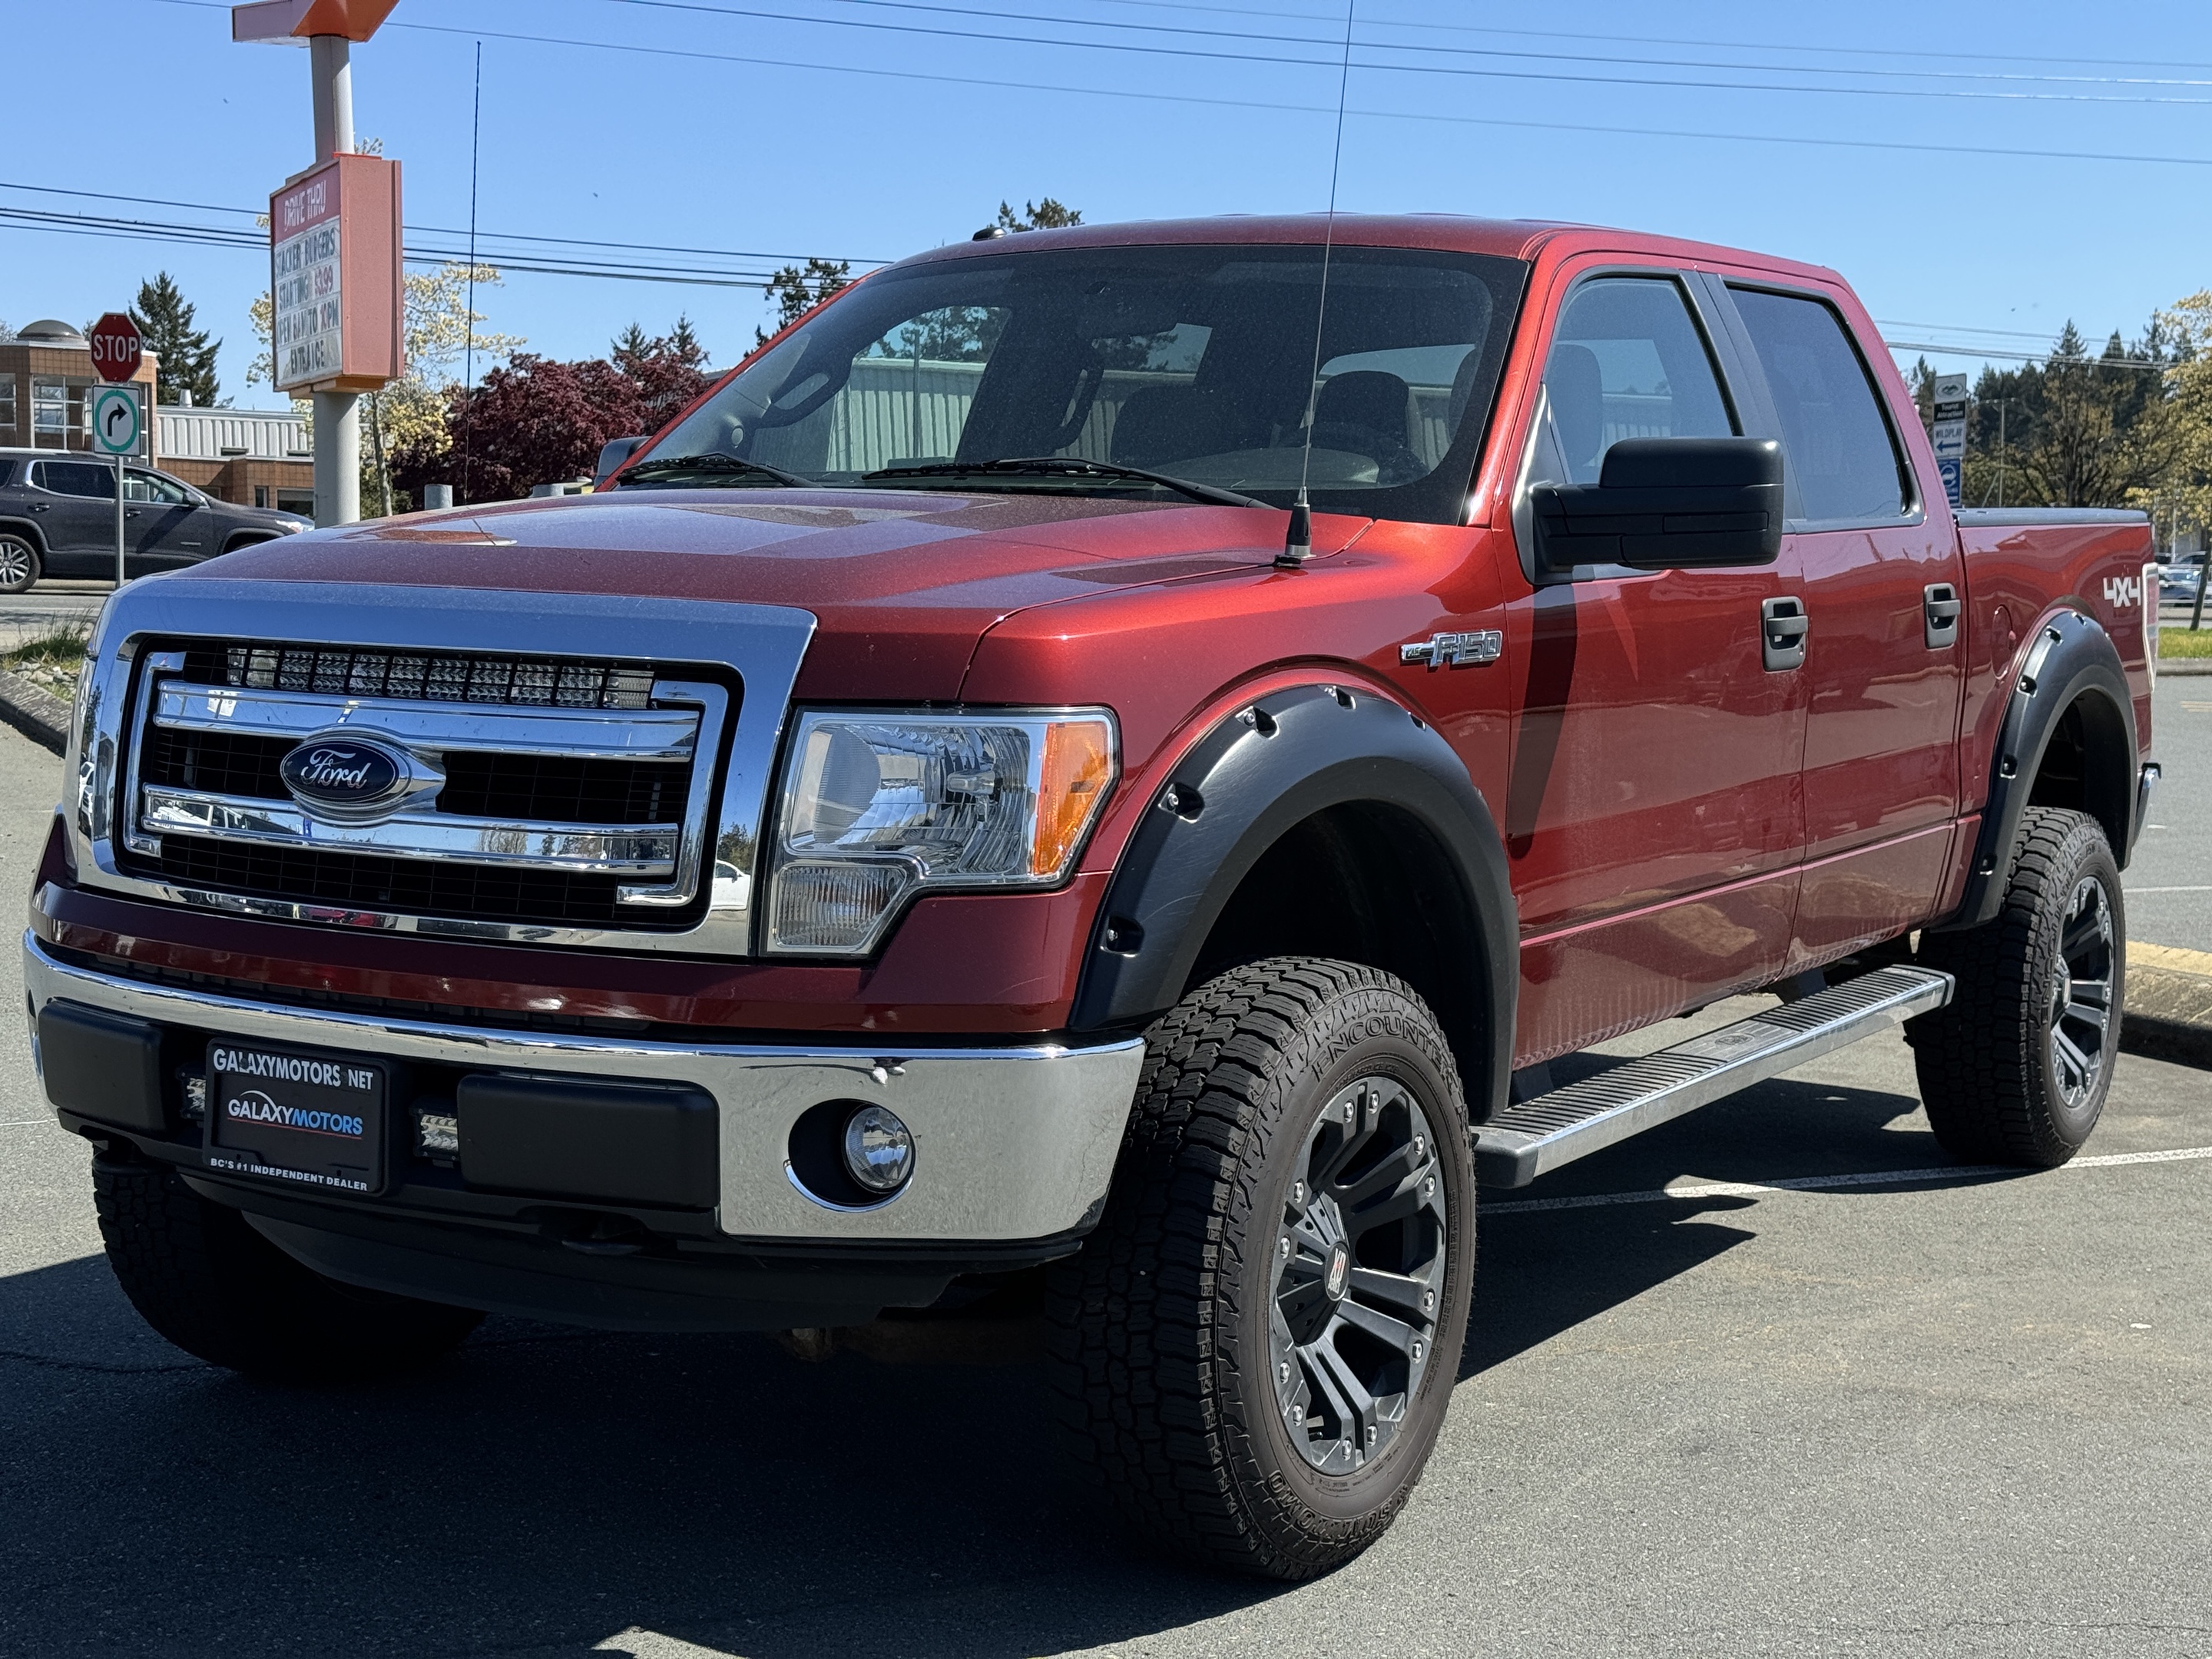 2014 Ford F-150 XLT 4WD-Compass,Keyless Entry,Payload Package